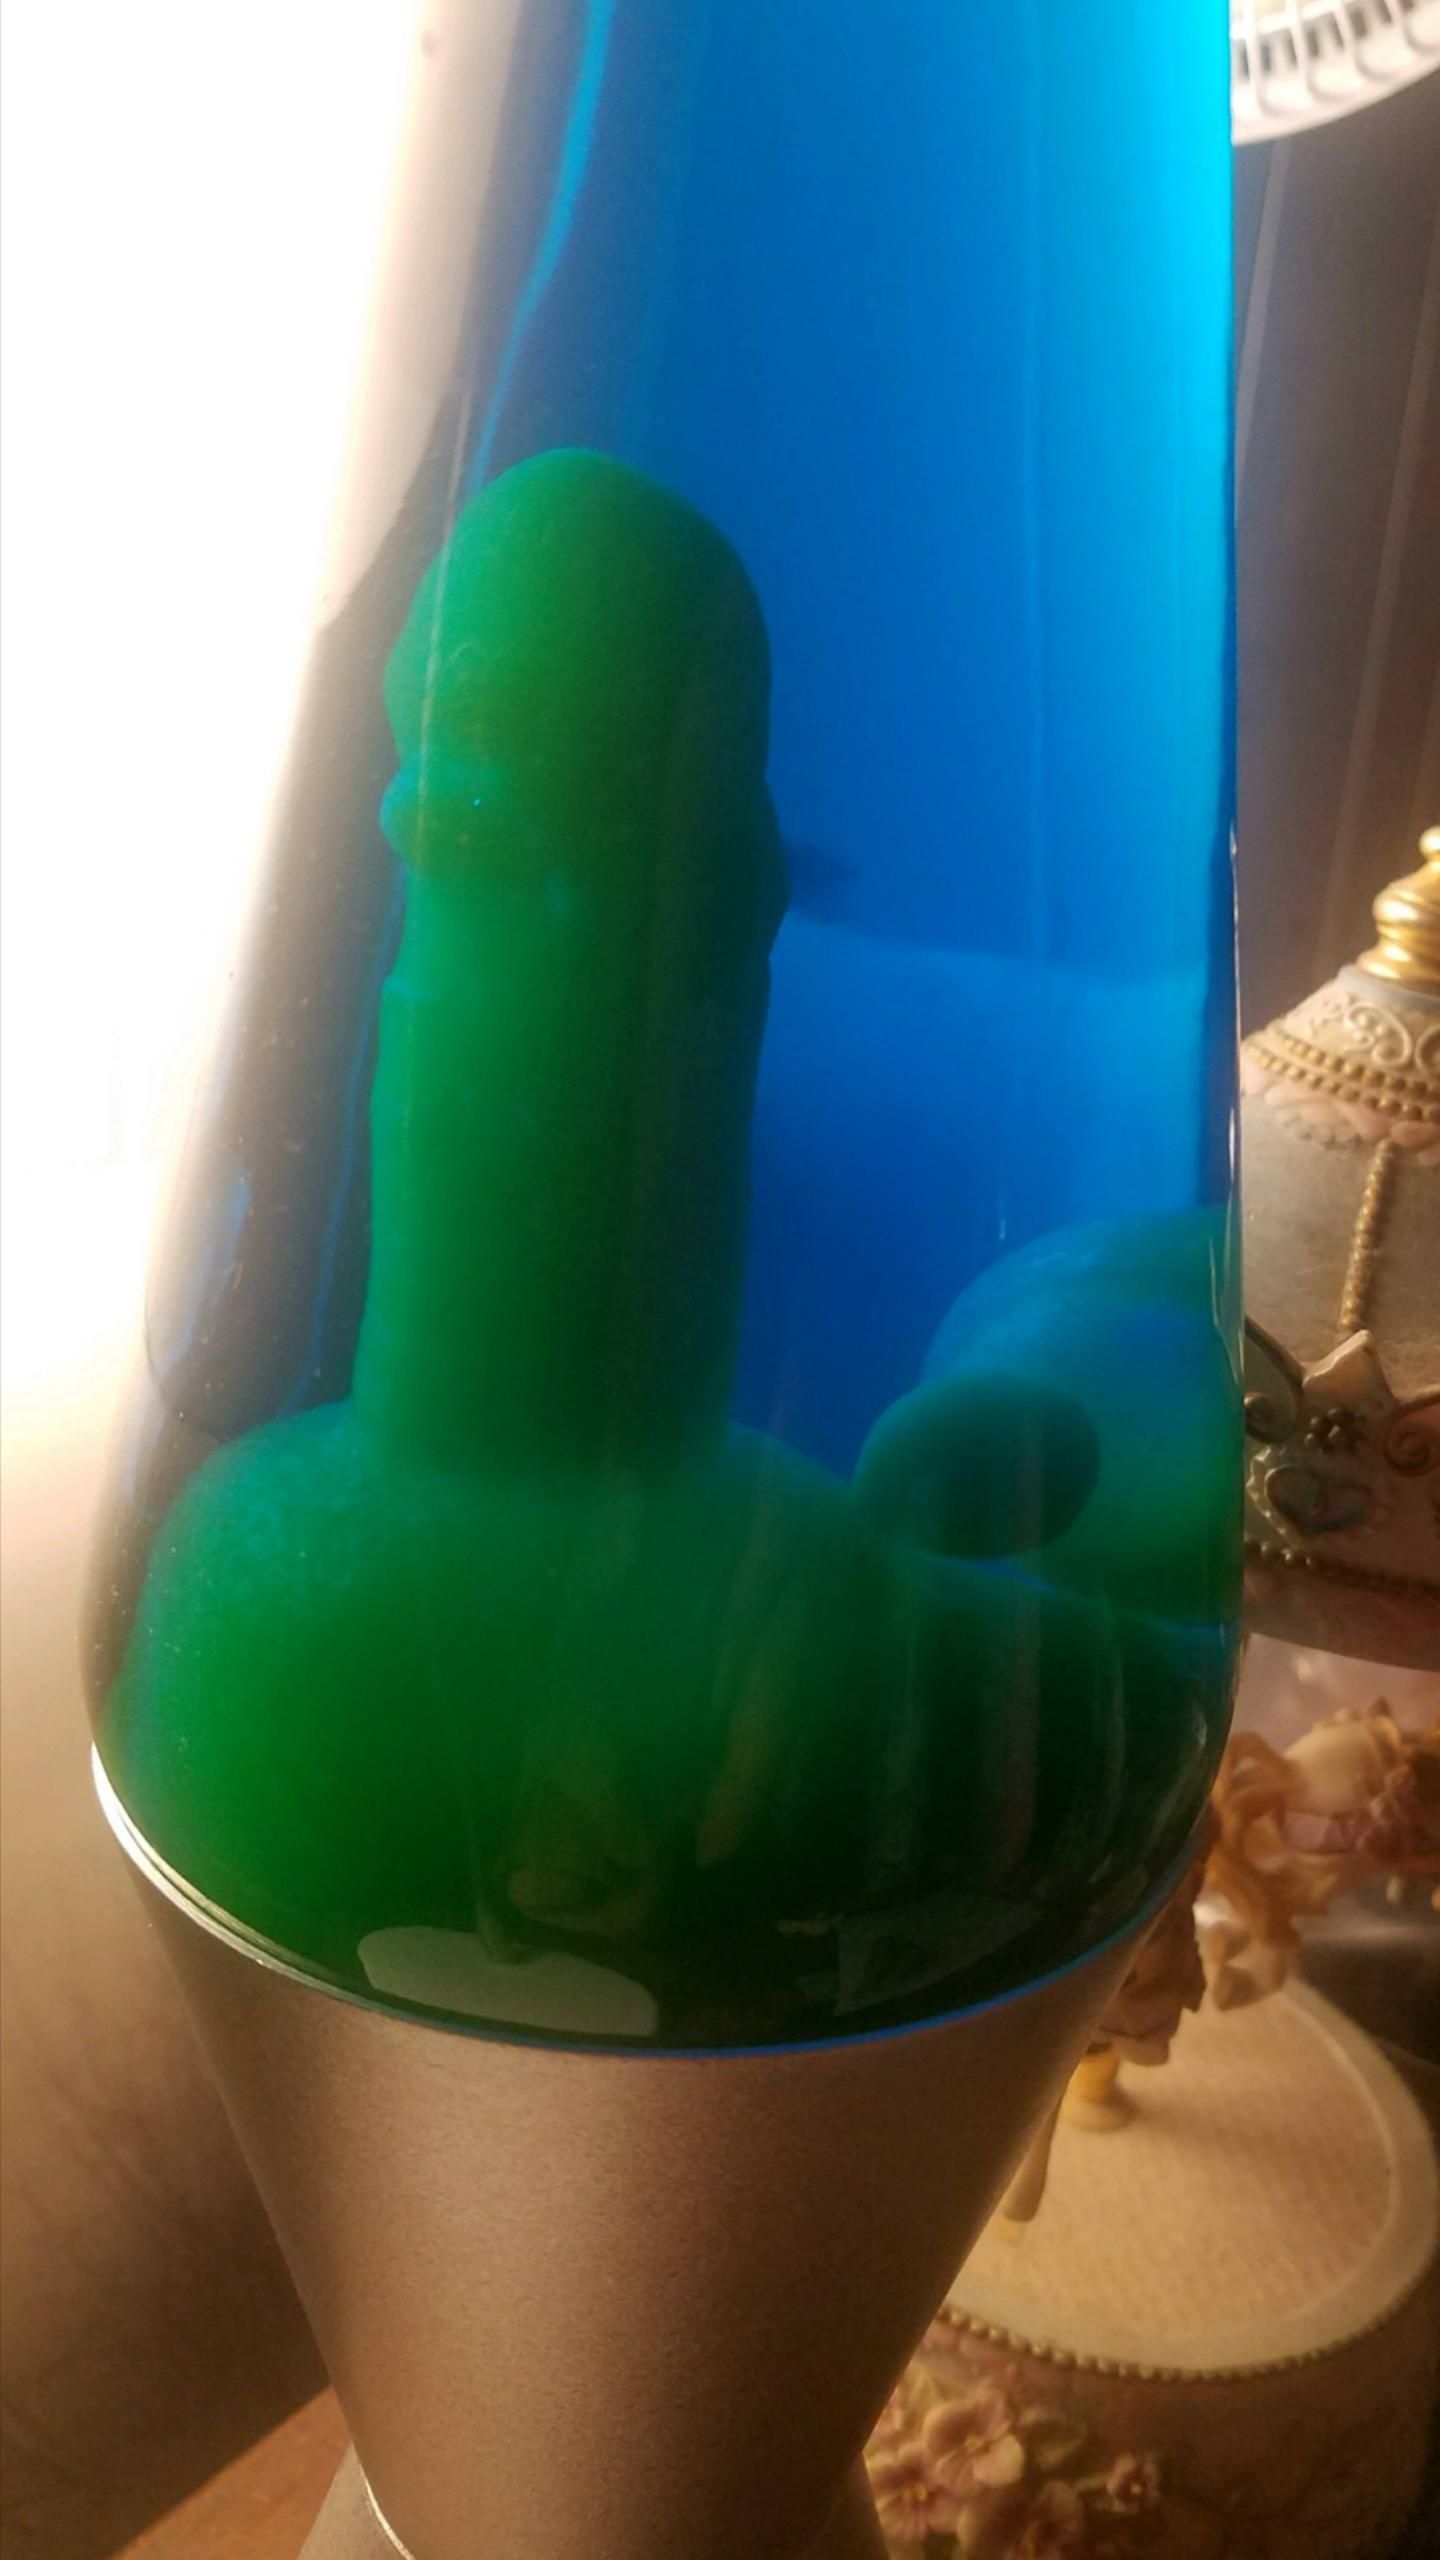 Wife went to turn the lava lamp on,